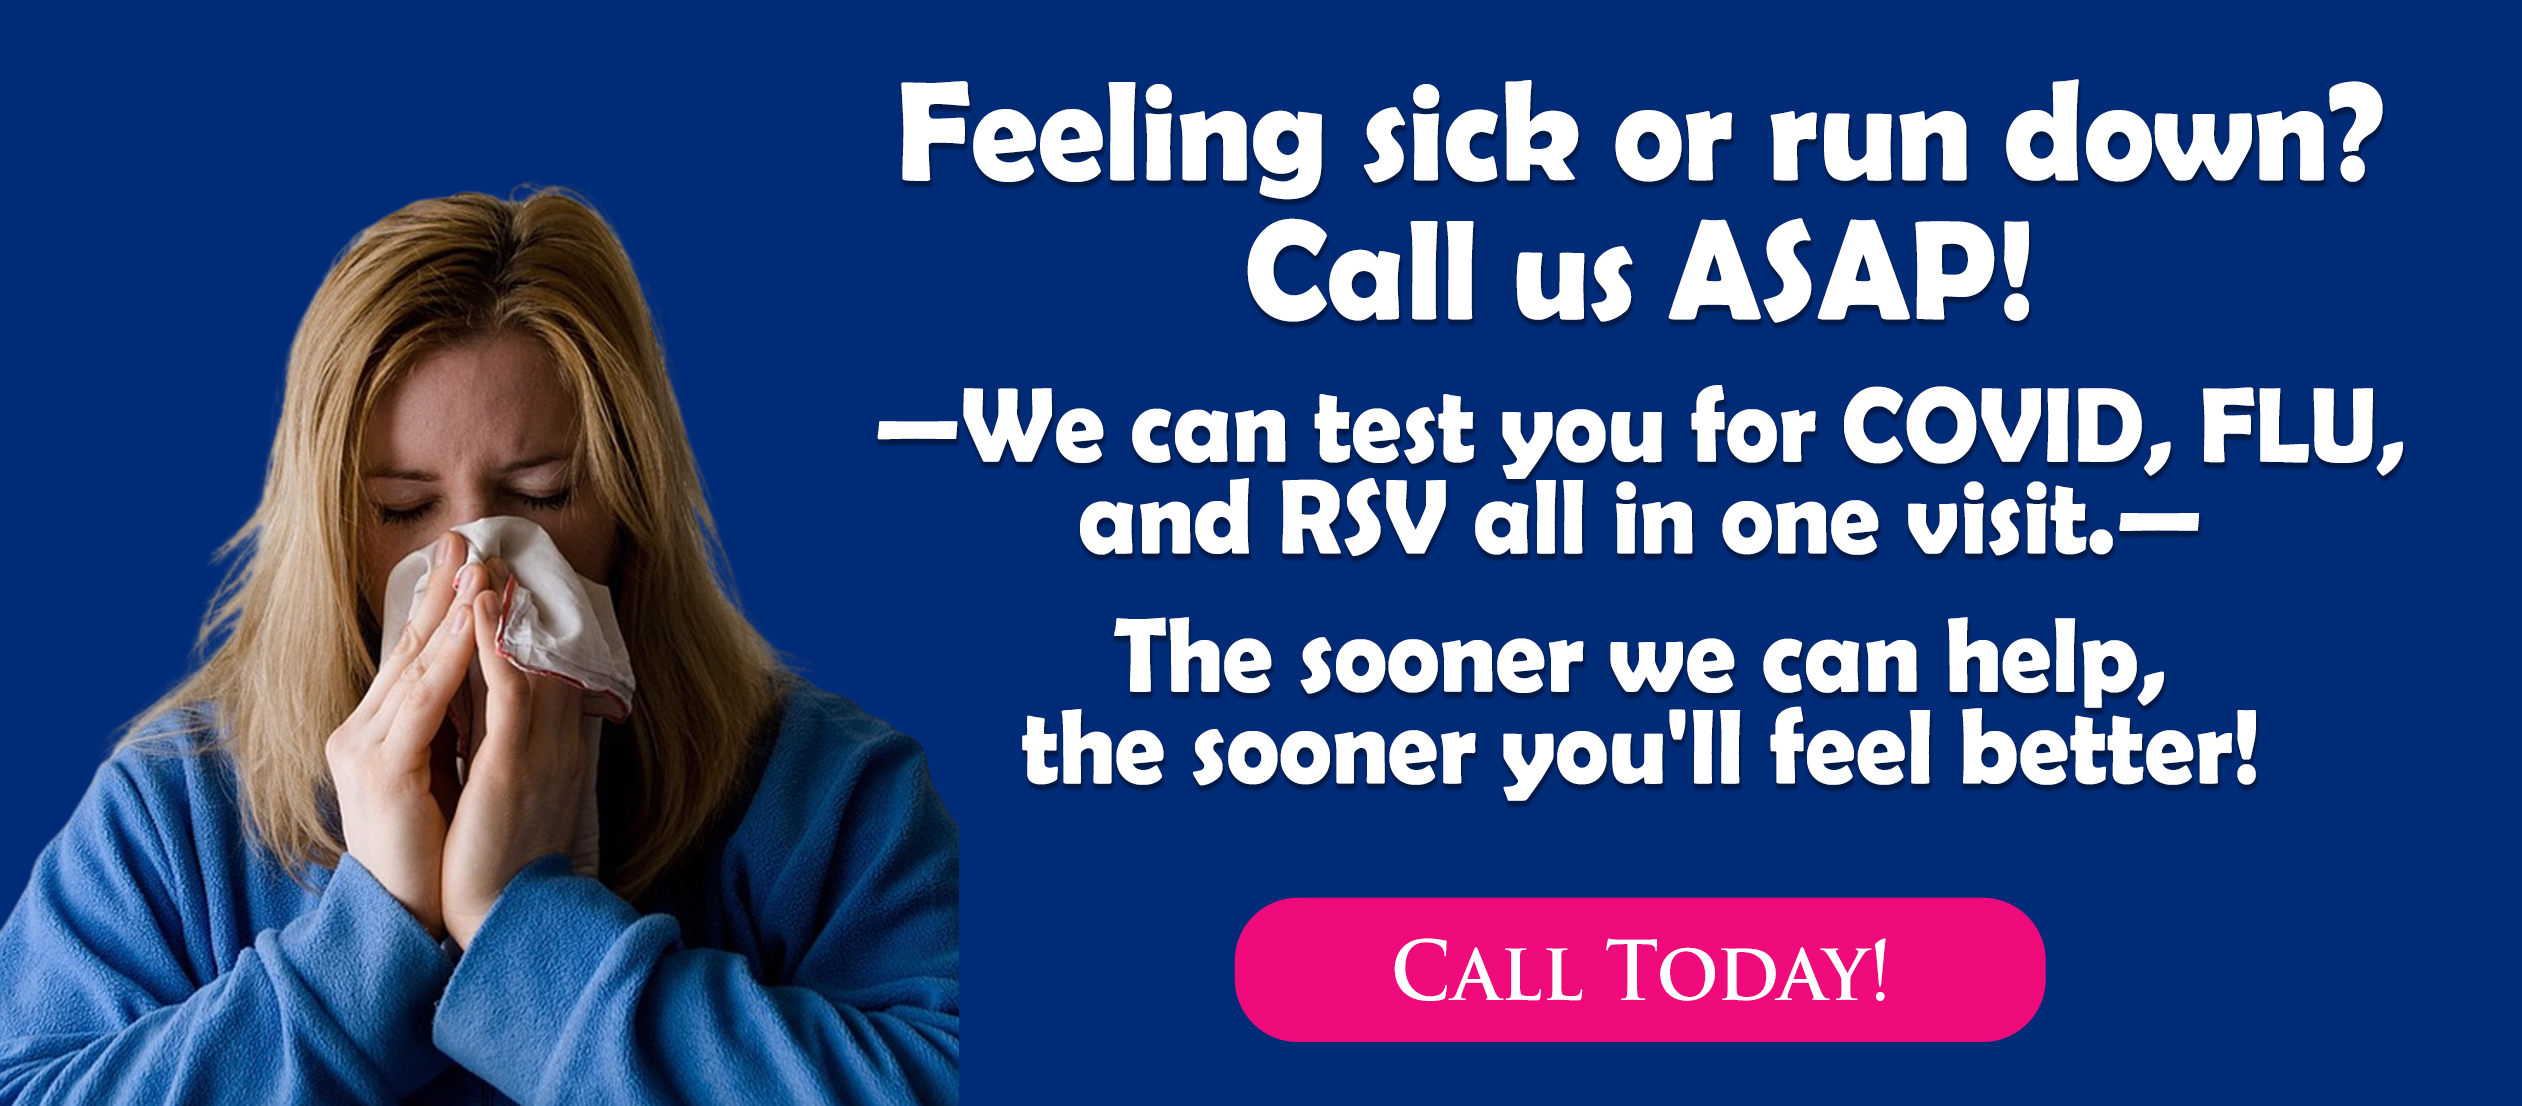 Call us to test for COVID-19, the flu, or RSV